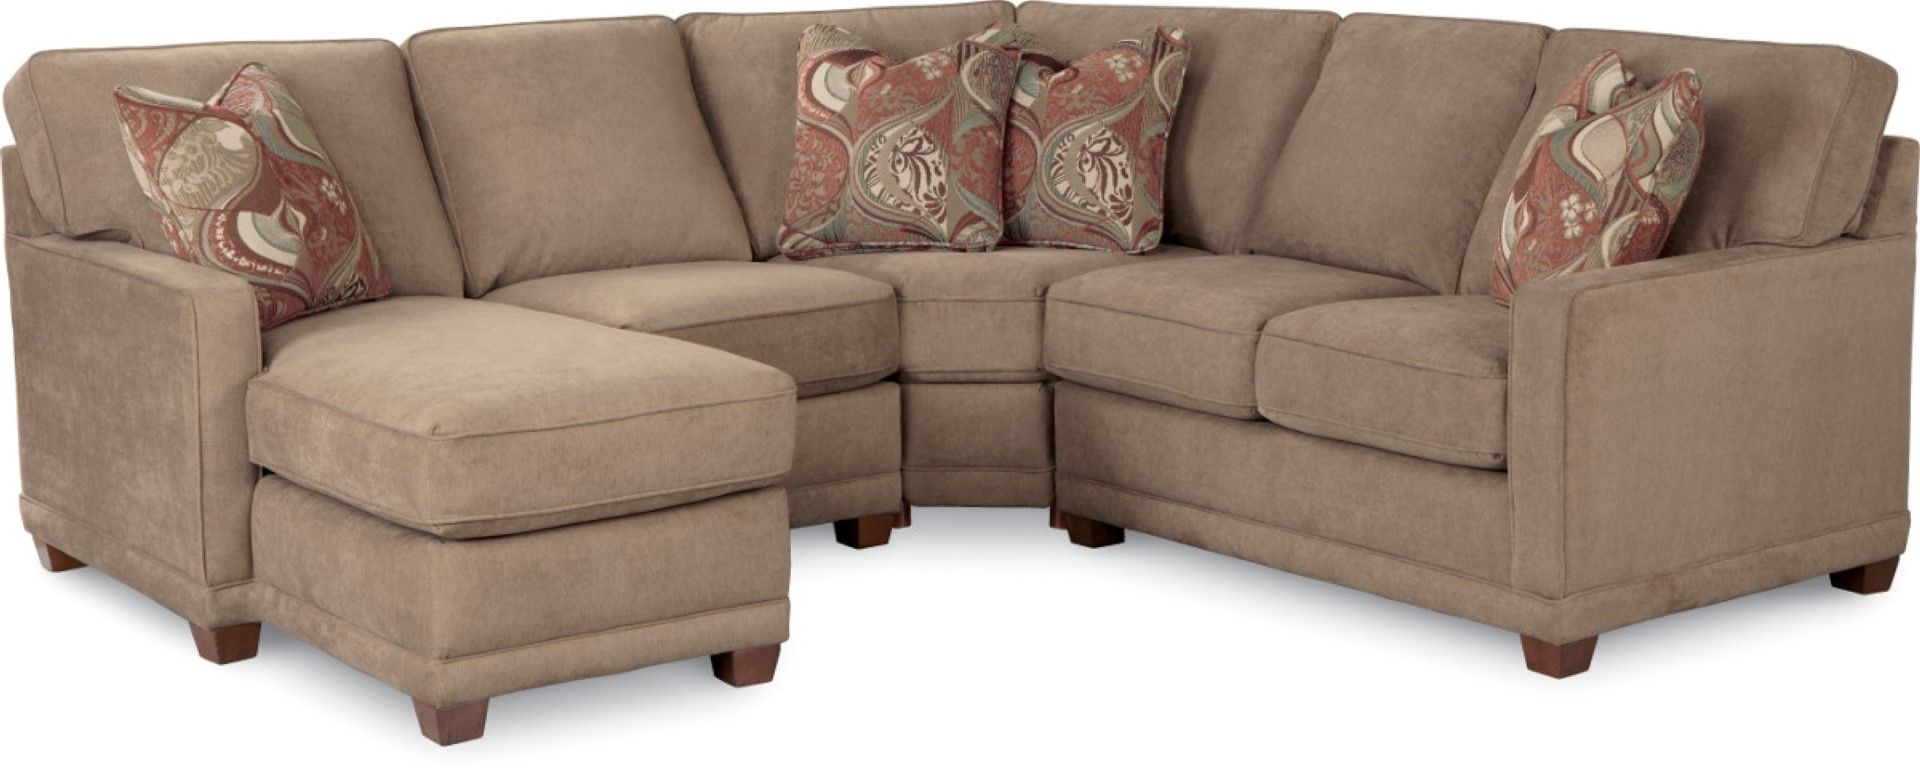 2023 Popular Sectional Sofas at Lazy Boy